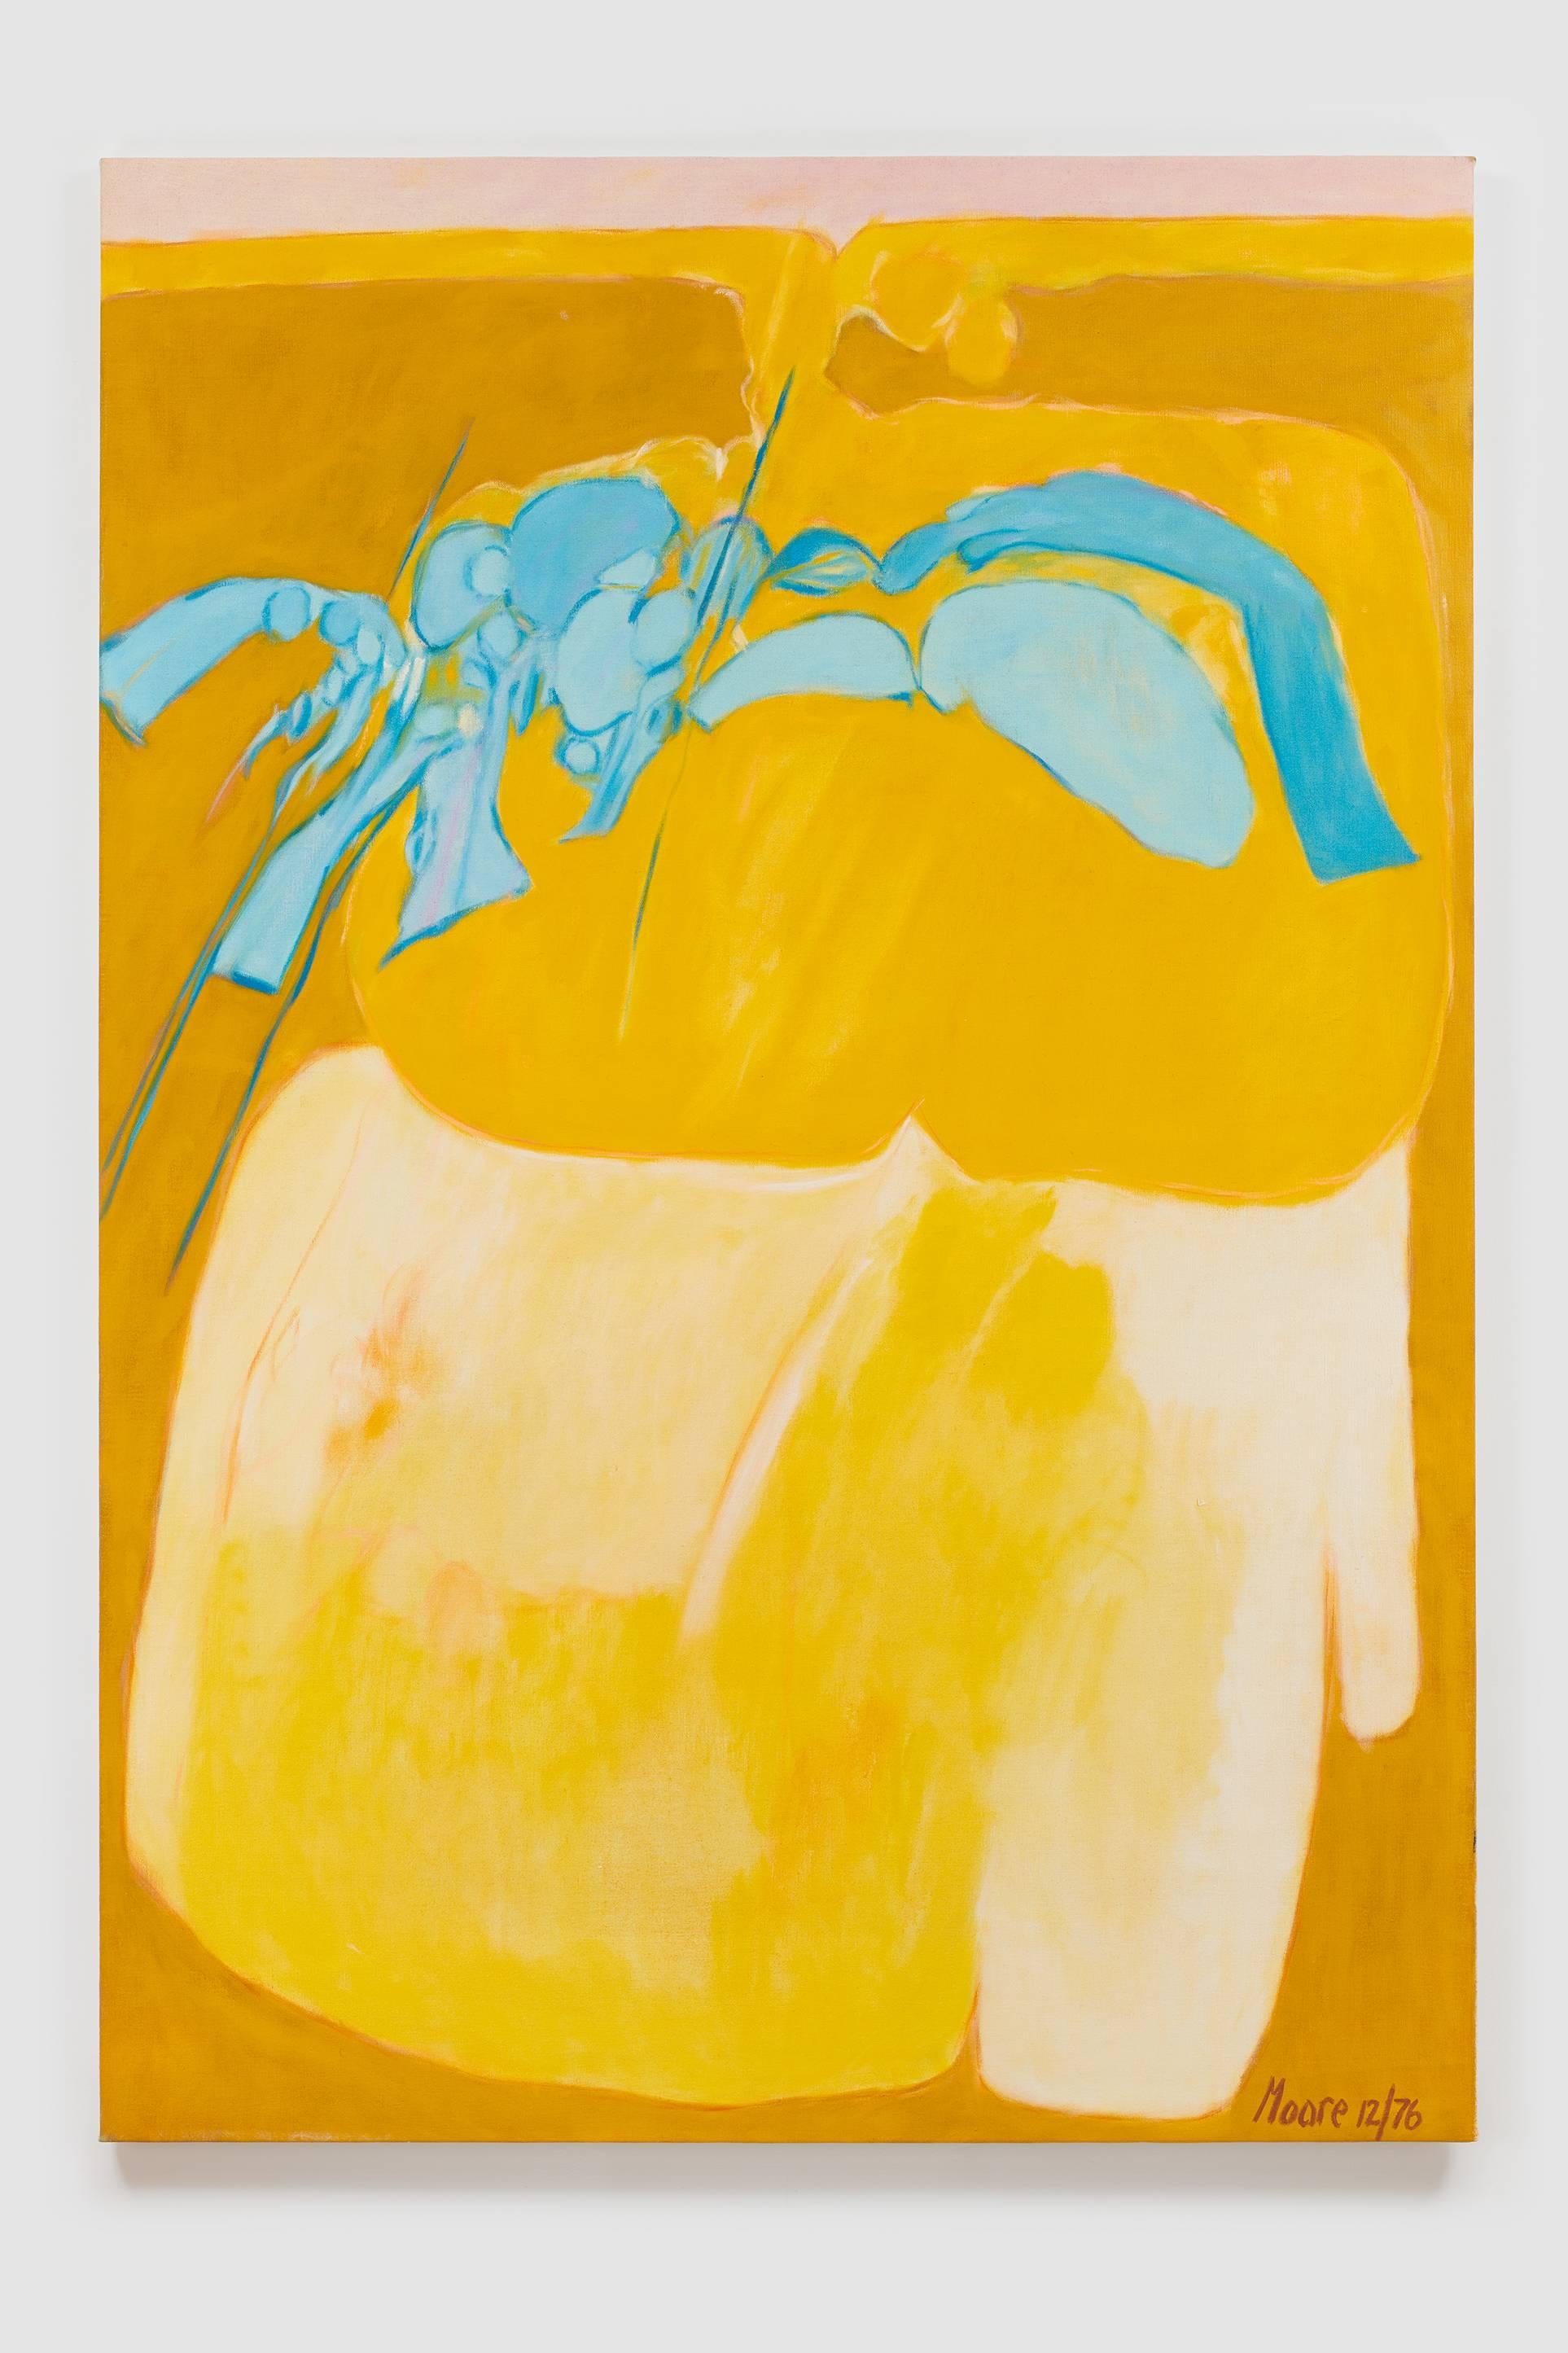 James Moore Abstract Painting - Untitled I (Yellow), acrylic on canvas painting, different shades of yellow